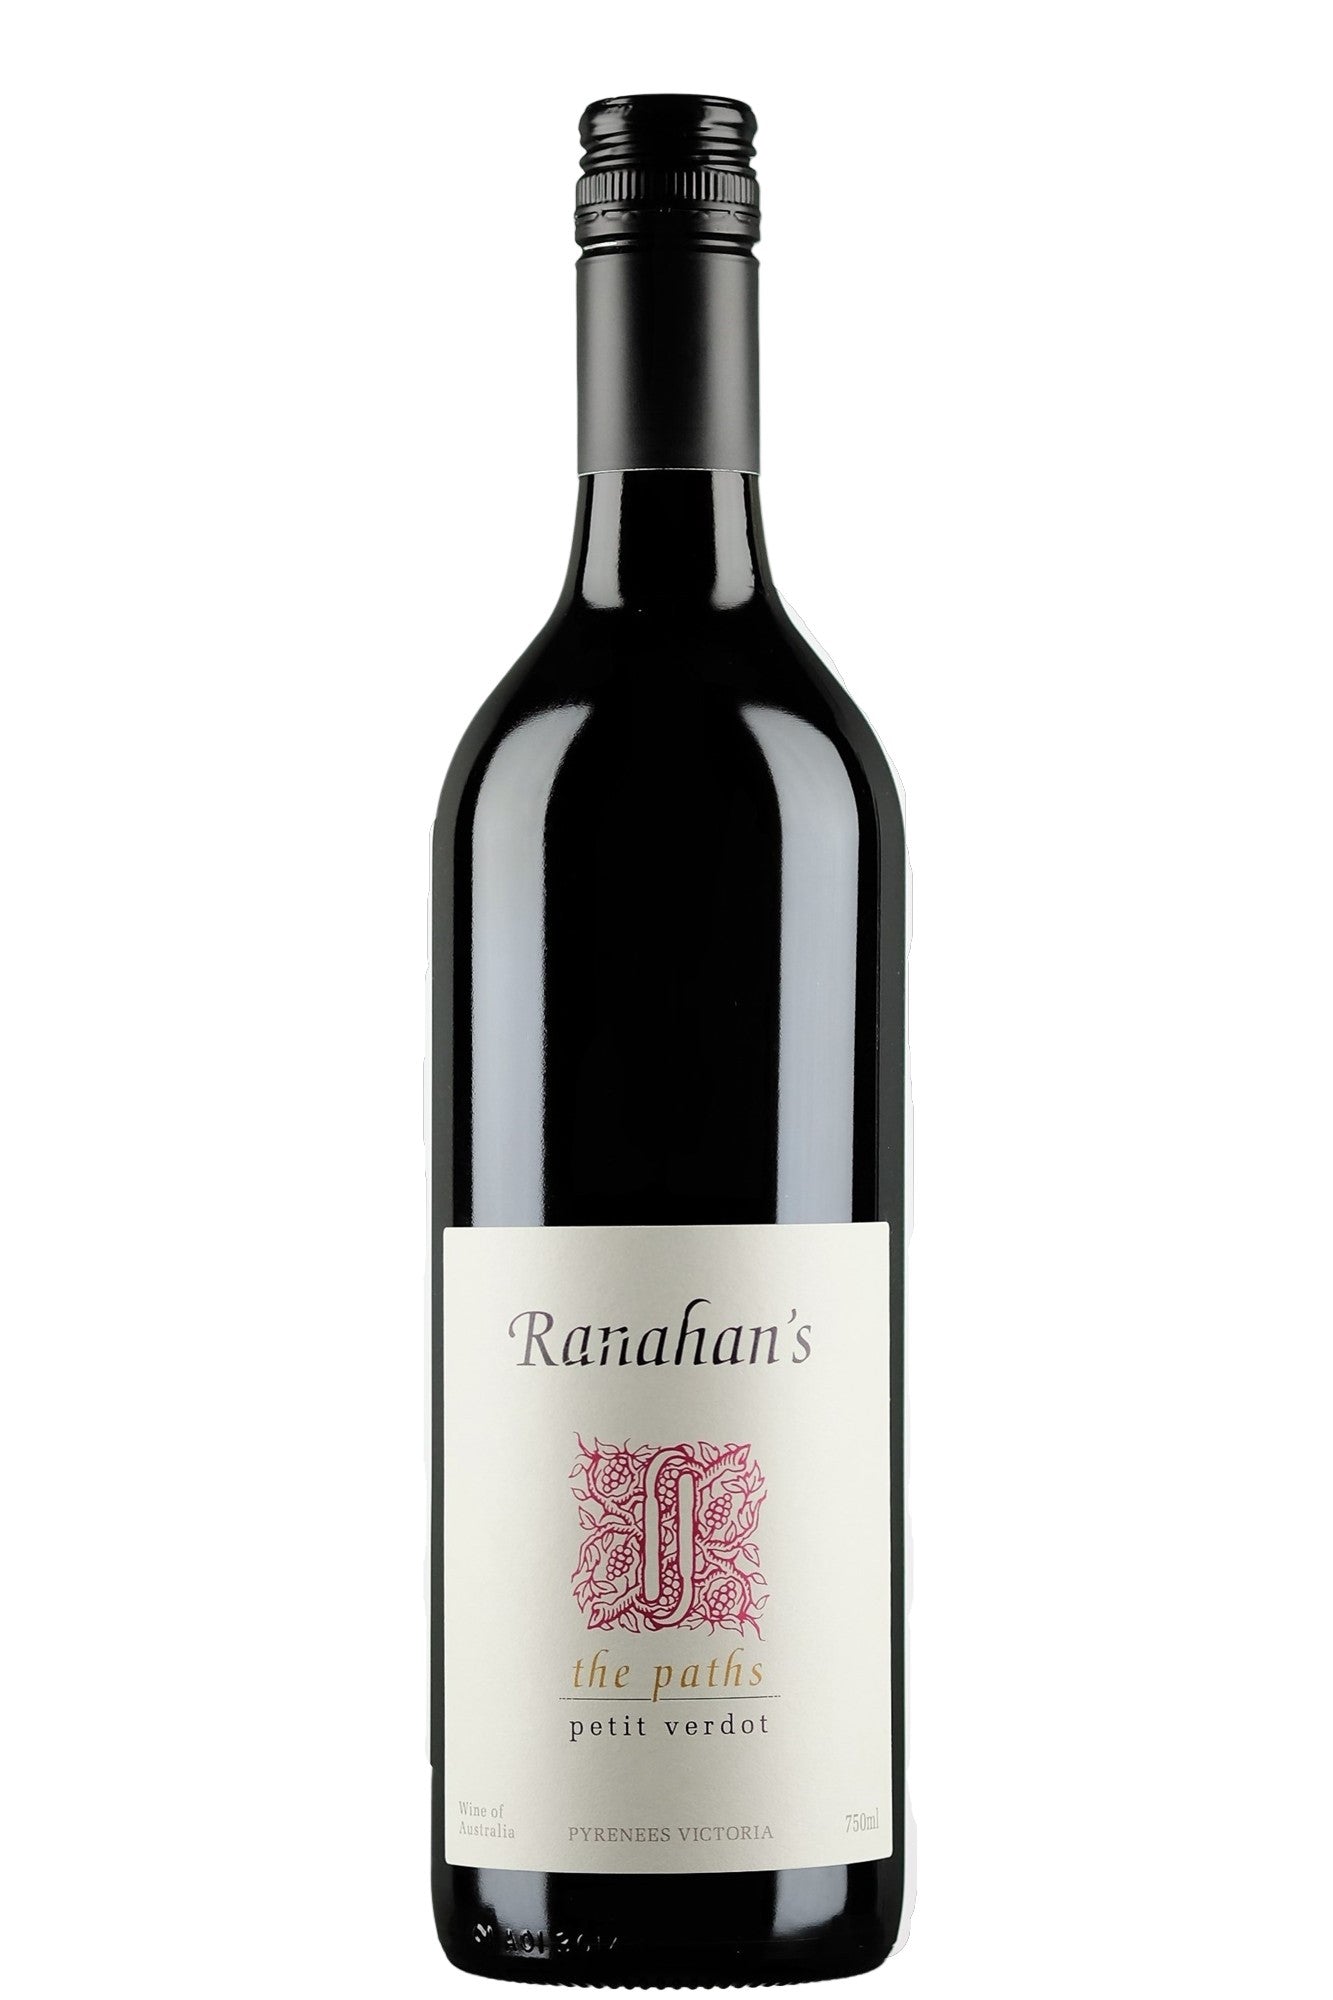 Ranahan's The Paths Chapter 17 Petit Verdot